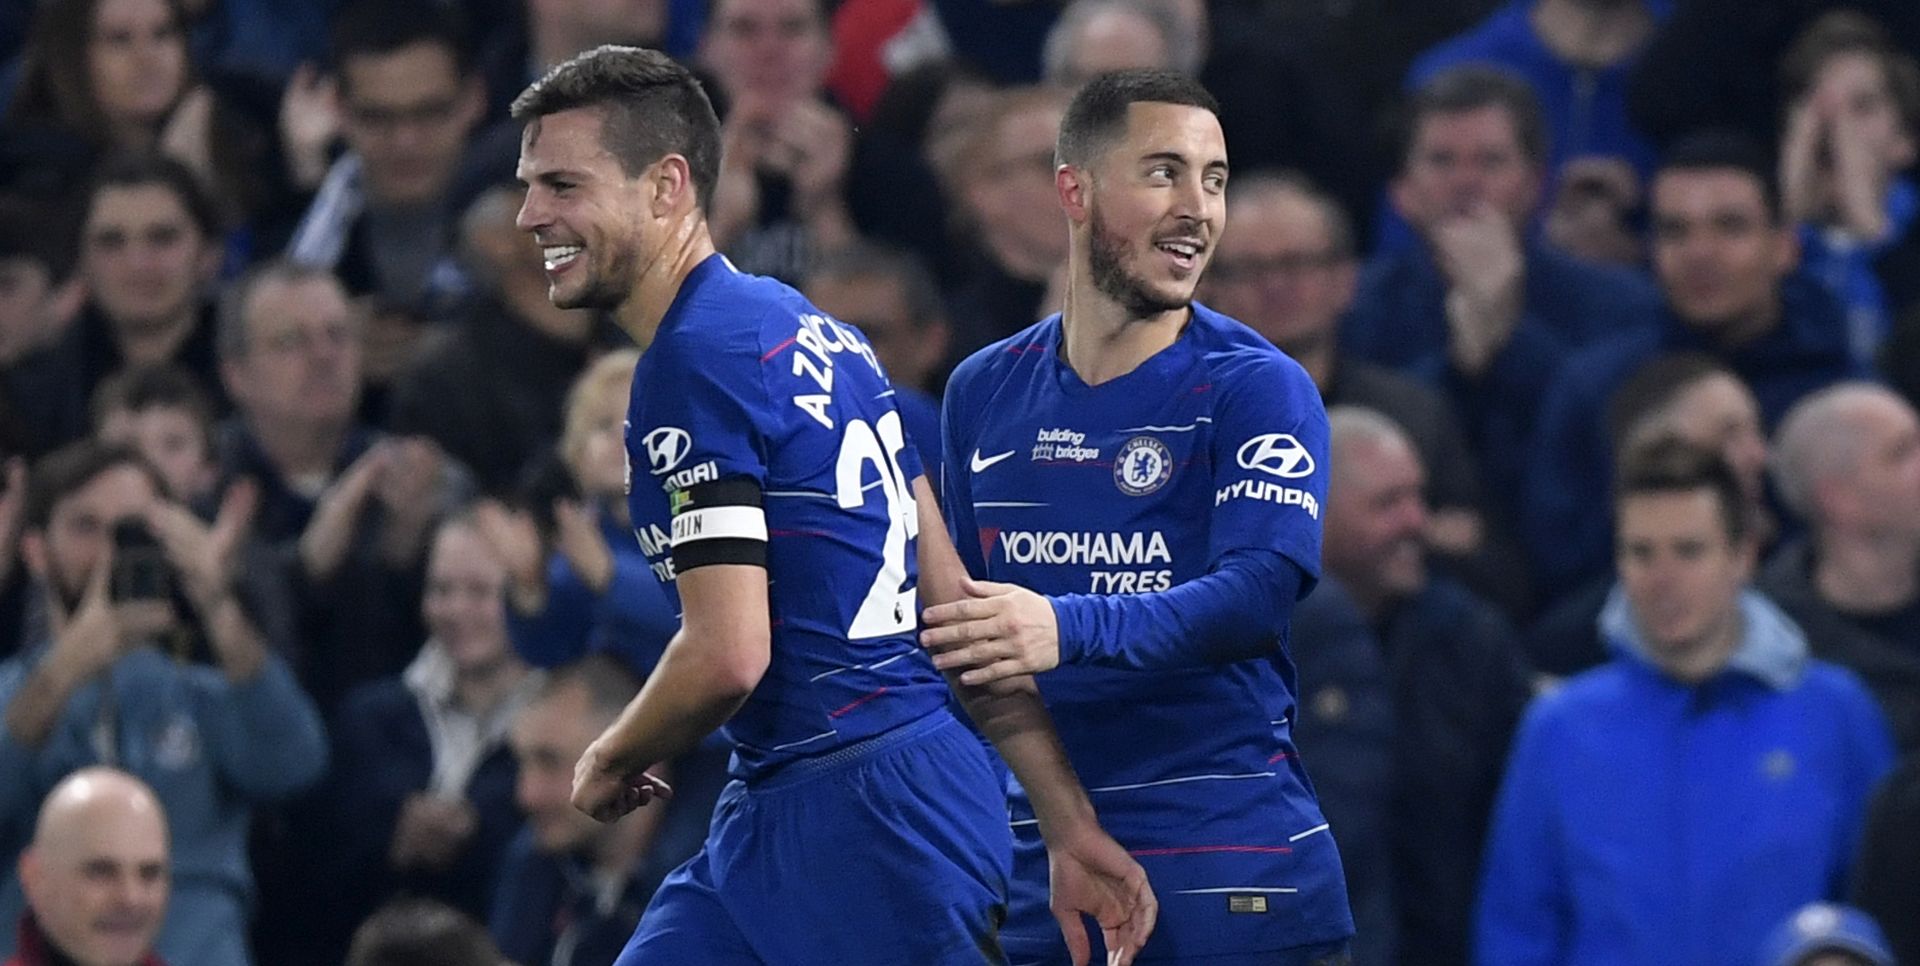 epa07492837 Chelsea's Eden Hazard (R) celebrates after scoring during the English Premier League soccer match between Chelsea and West Ham United at Stamford Bridge Stadium, London, Britain, 08 April 2019.  EPA/WILL OLIVER EDITORIAL USE ONLY. No use with unauthorized audio, video, data, fixture lists, club/league logos or 'live' services. Online in-match use limited to 120 images, no video emulation. No use in betting, games or single club/league/player publications